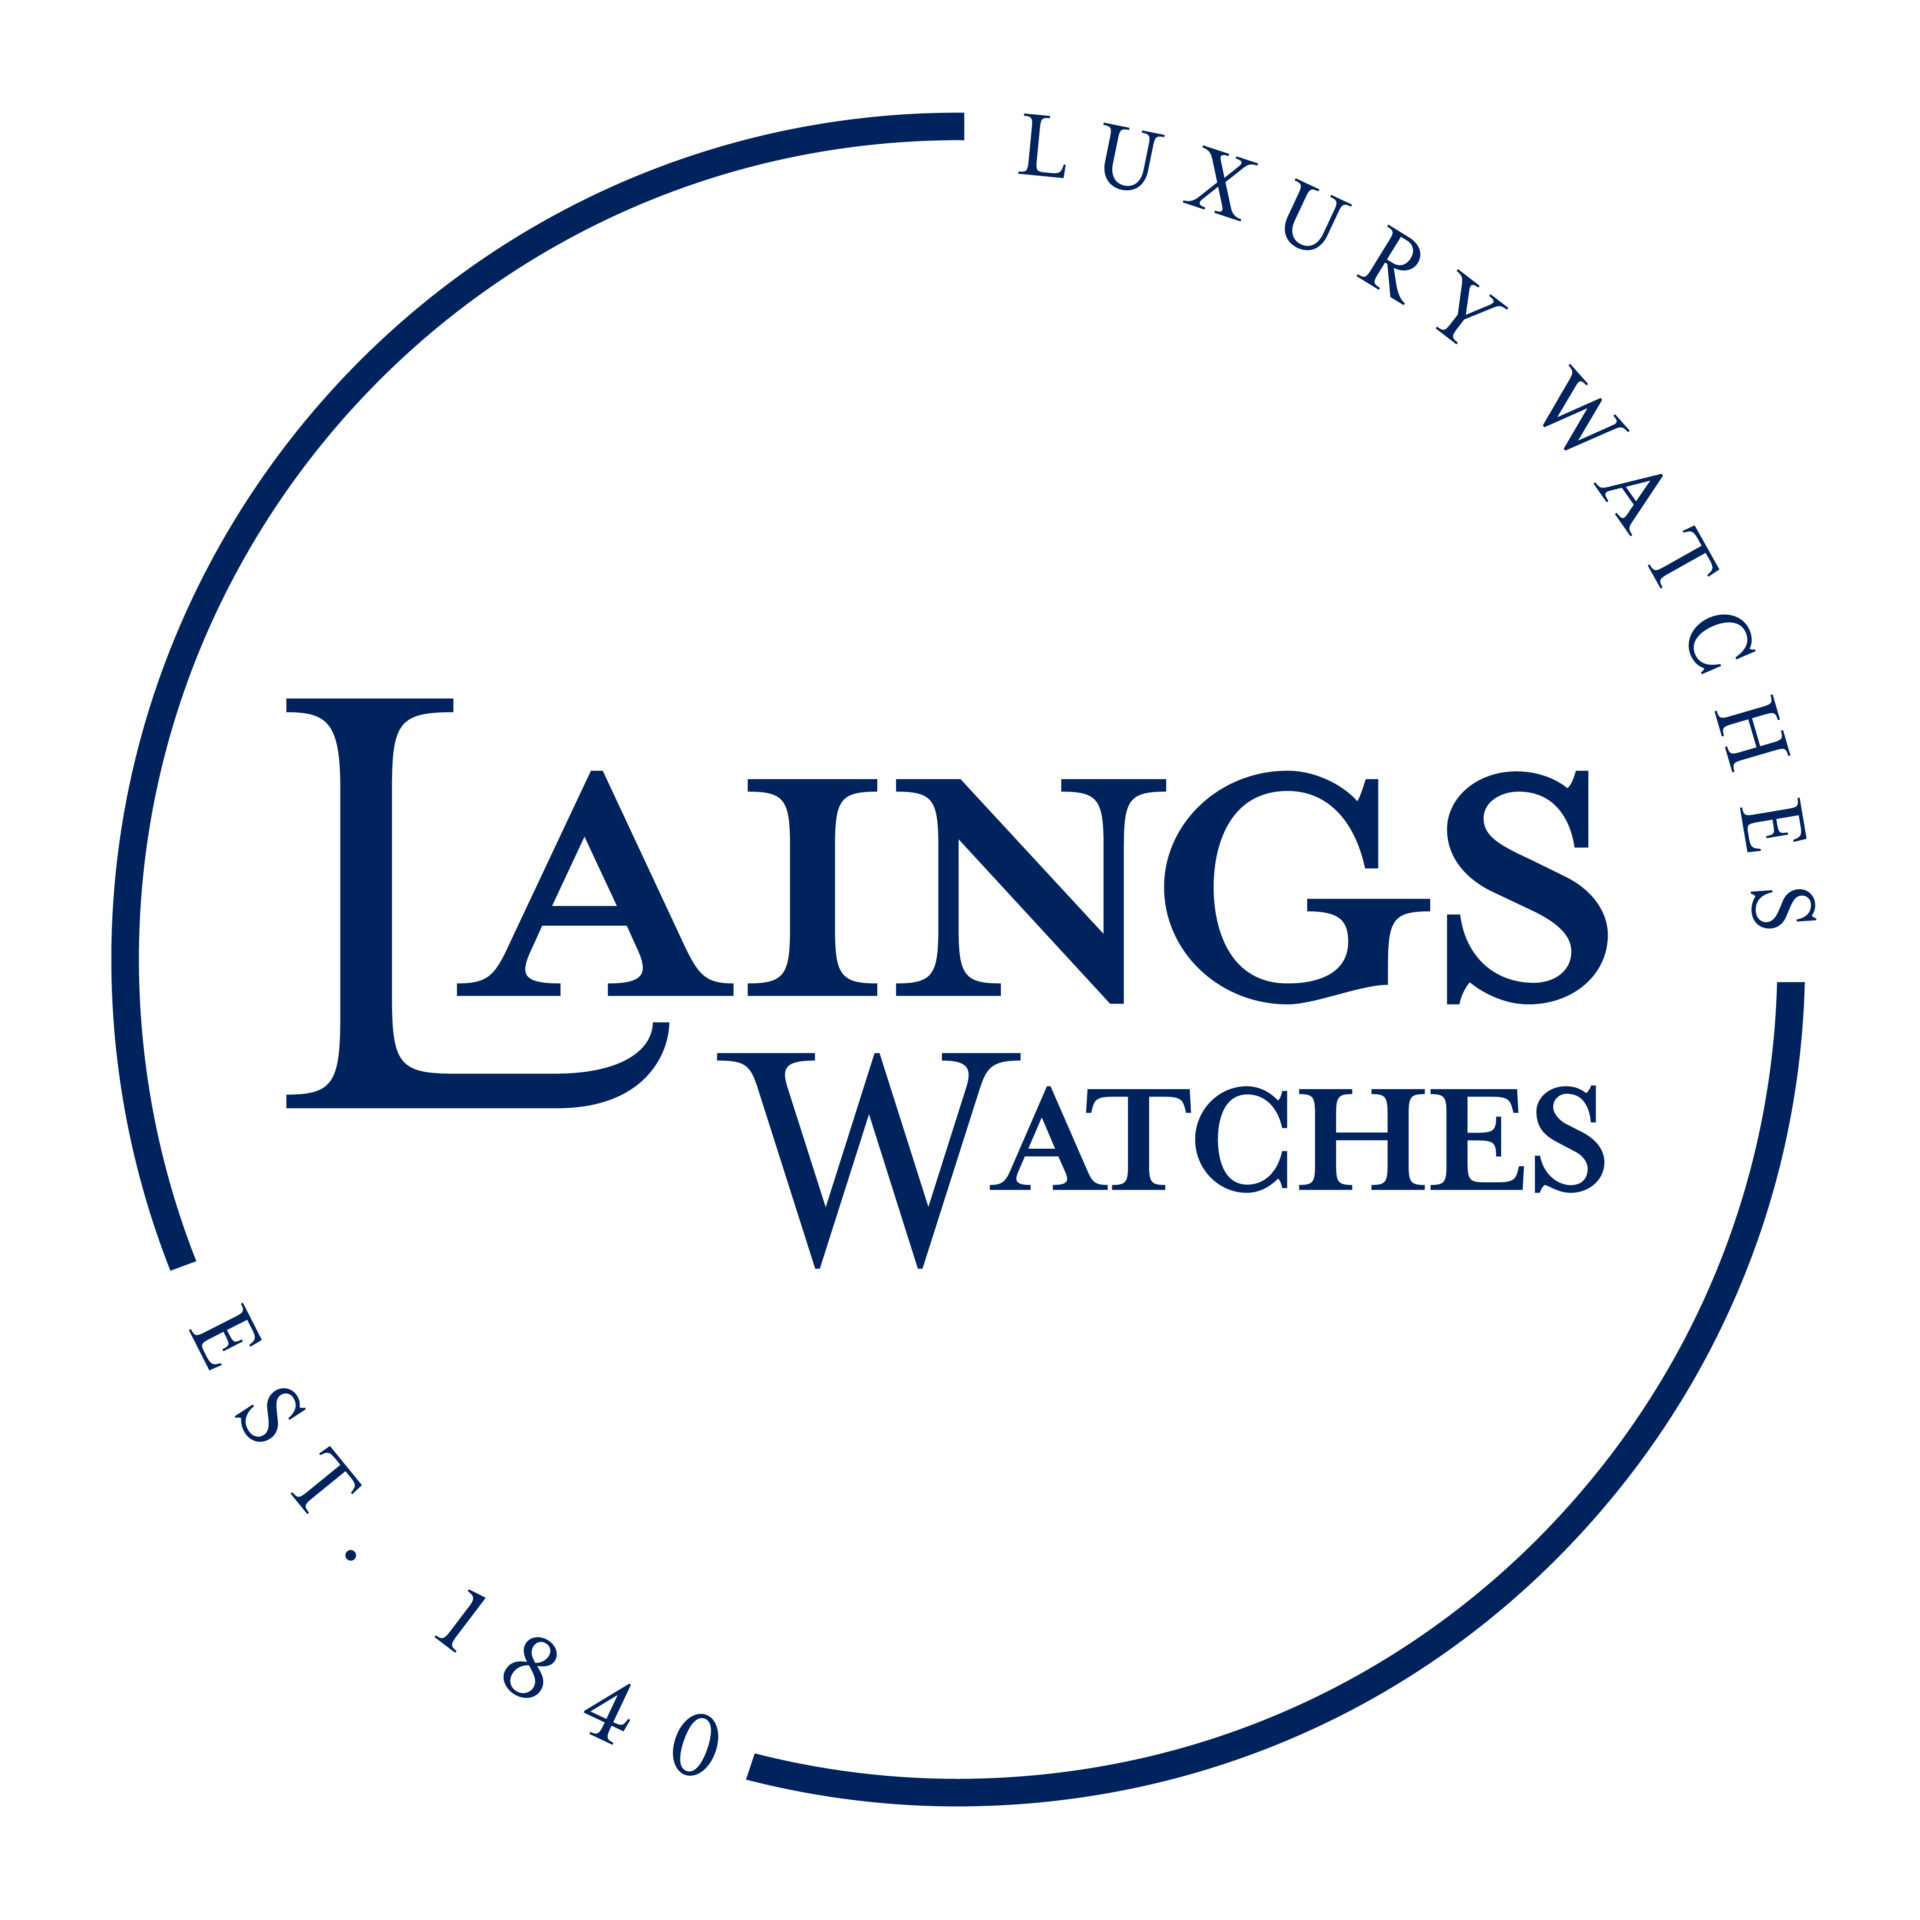 Laings watches logo